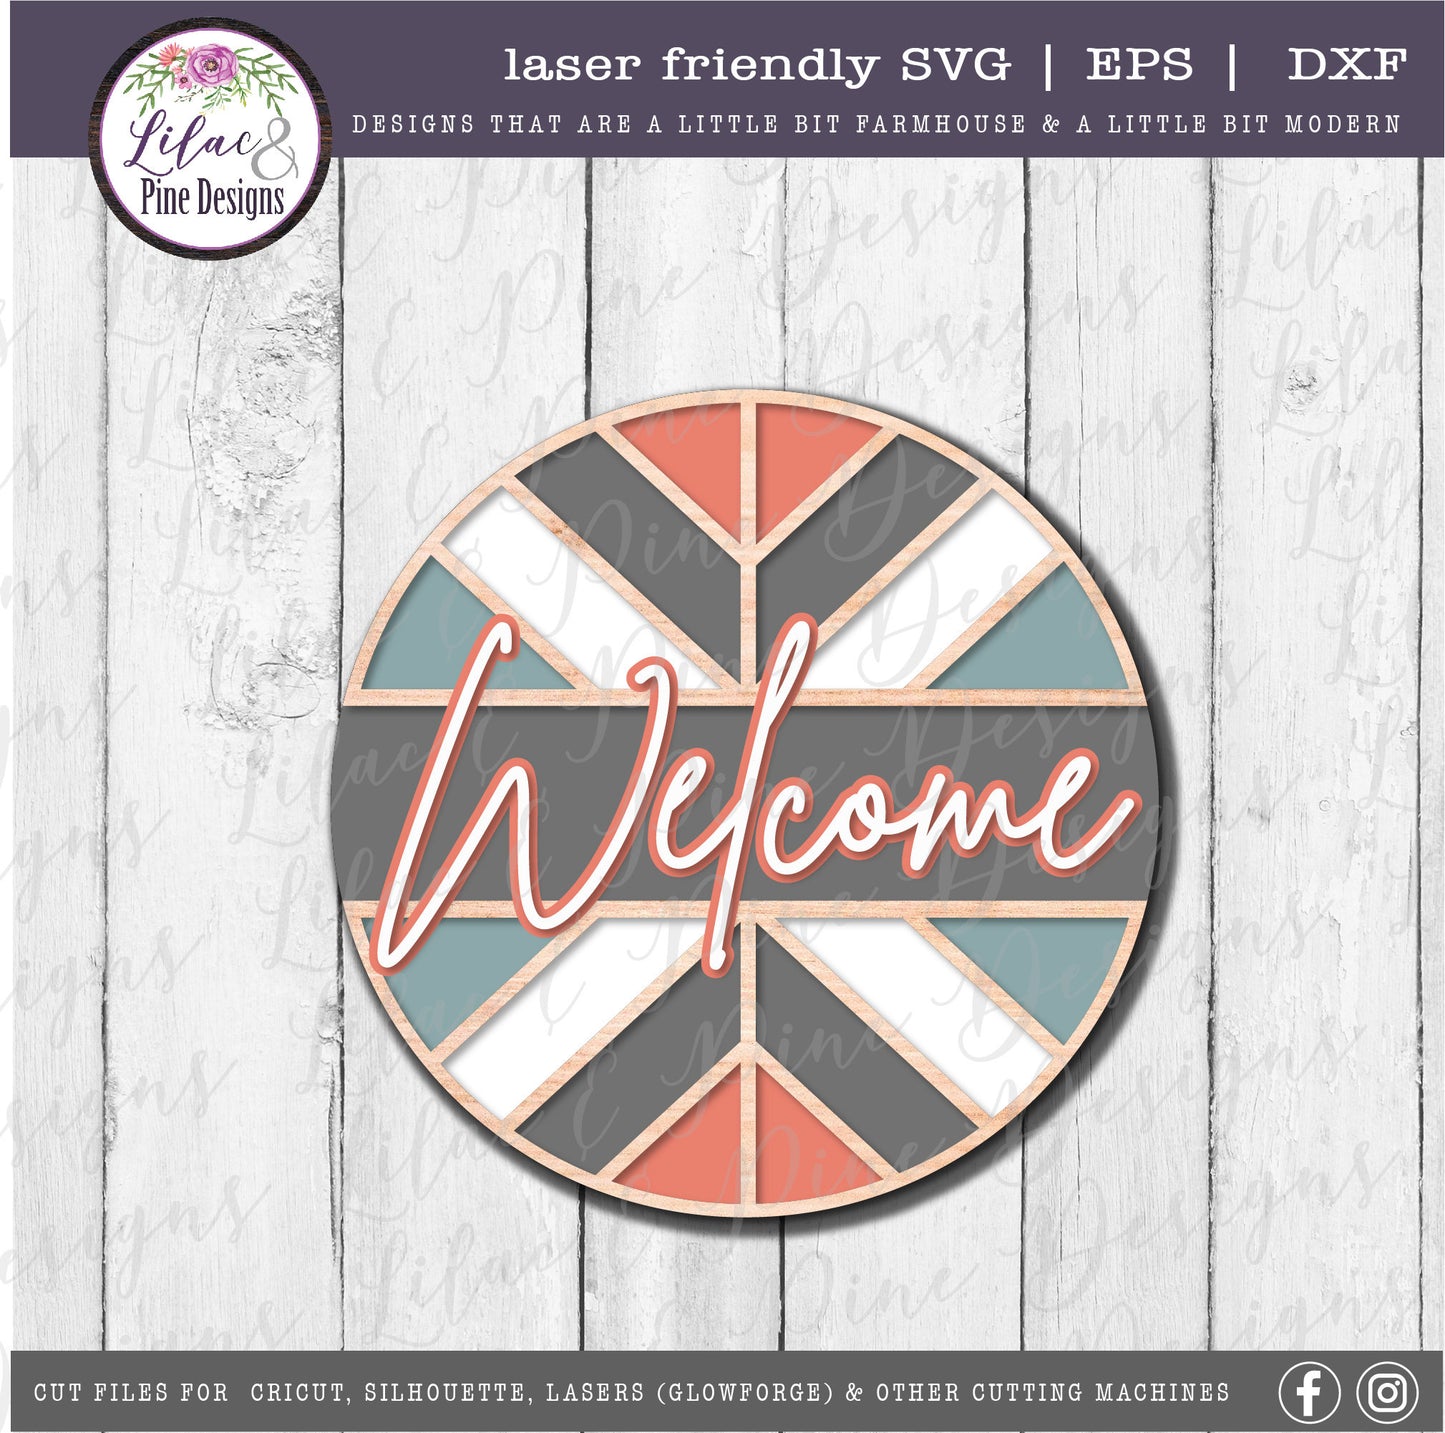 Welcome boho round, quilt lover gift, Welcome SVG, front door decor, round wood sign, name sign, porch decor, Glowforge Svg, laser cut file